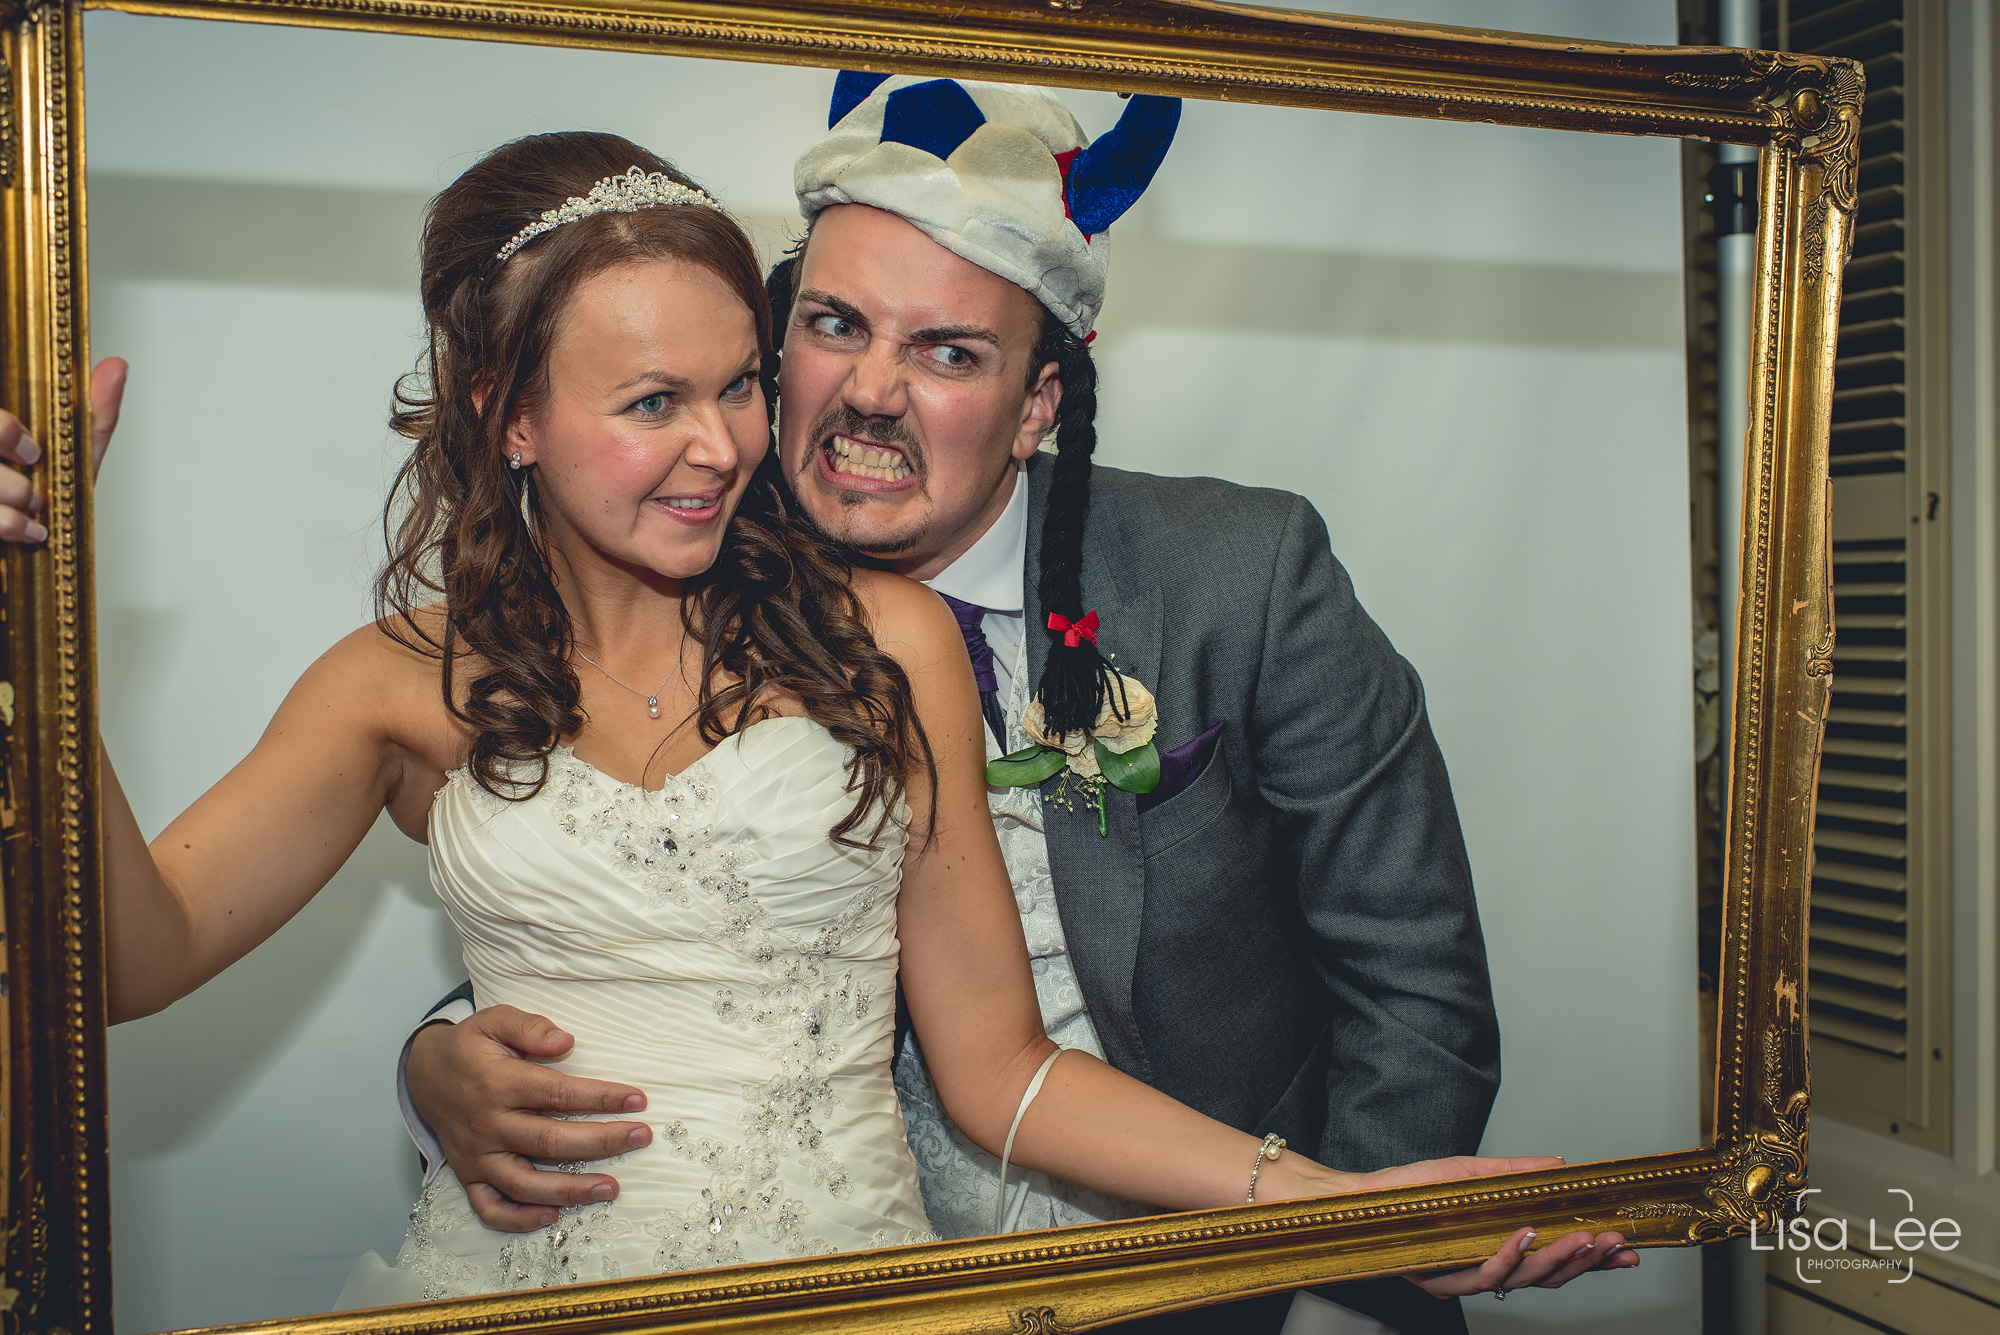 Lord-Bute-Hotel-Lisa-Lee-Documentary-Wedding-Photography-party-17.jpg